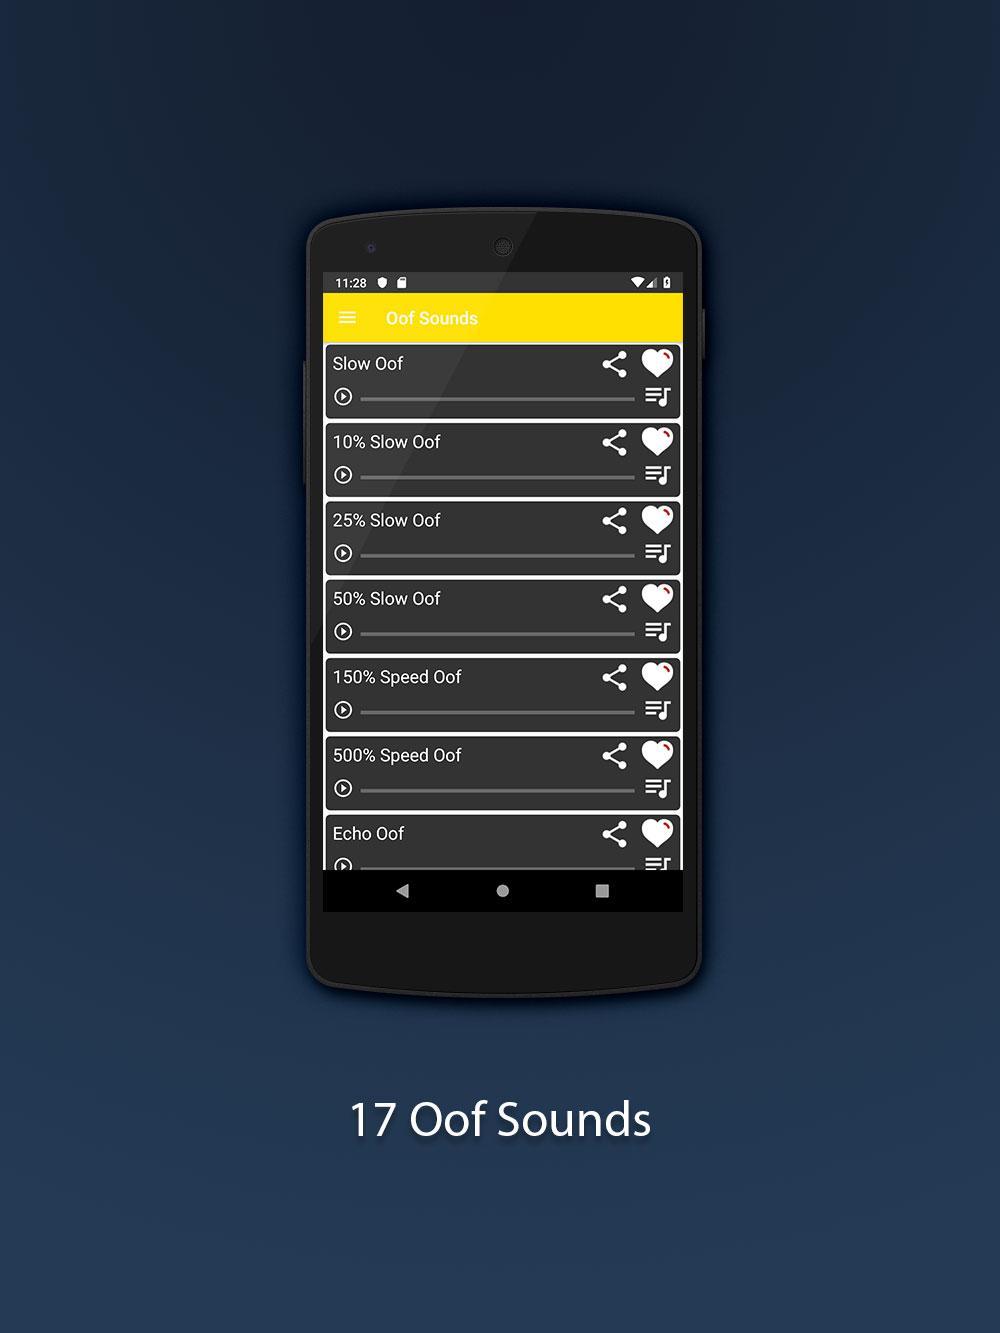 Oof Roblox Soundboard For Android Apk Download - roblox oof meme soundboard